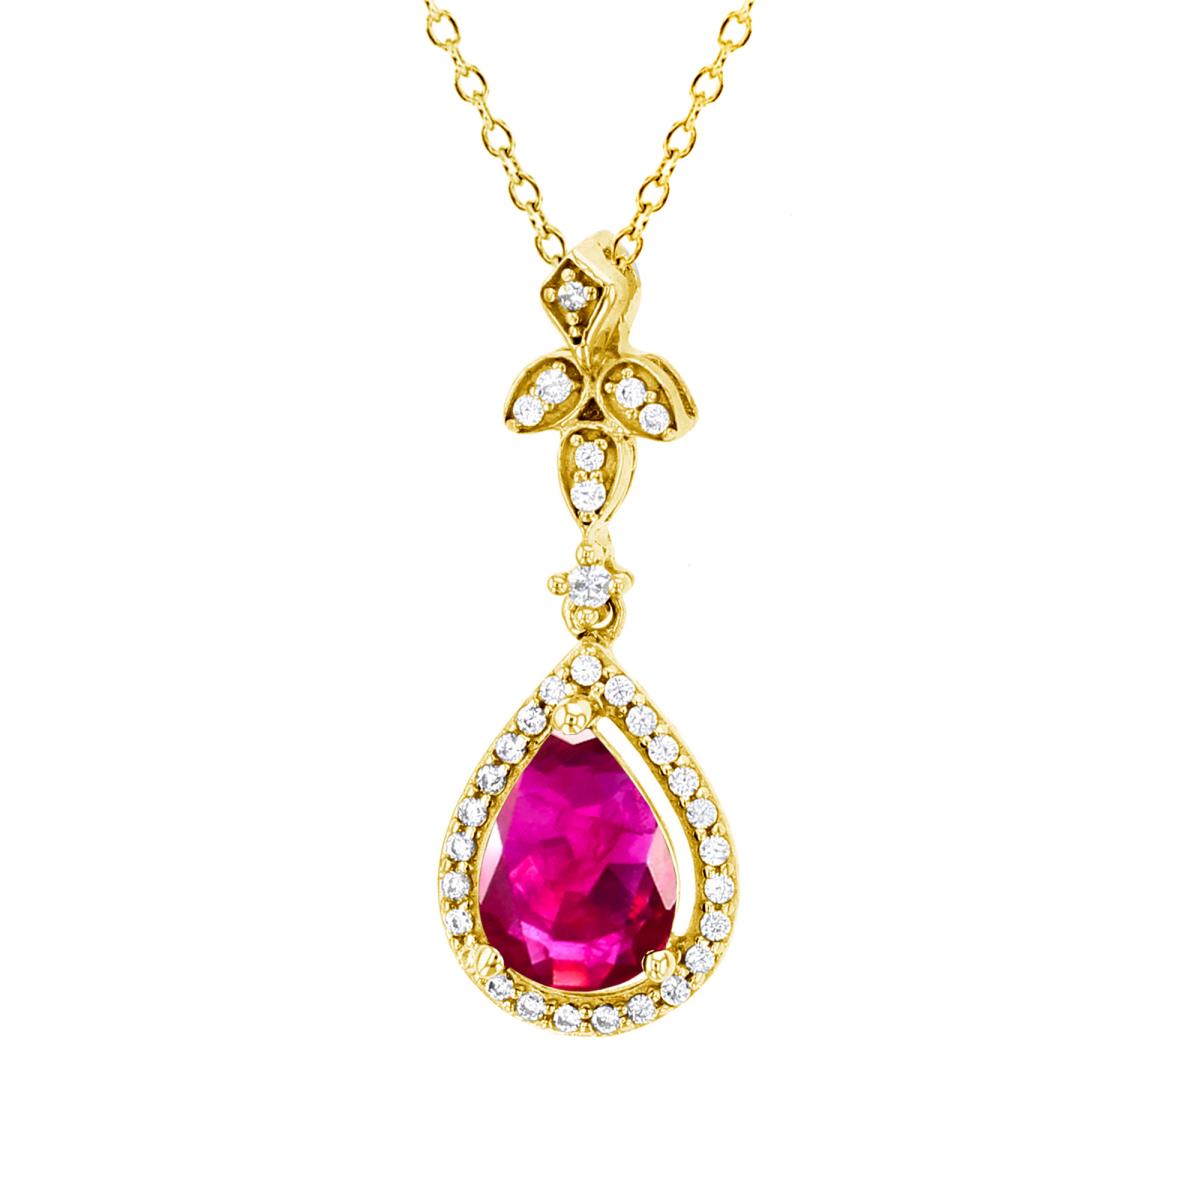 10K Yellow Gold 0.01CTTW Rnd Diamonds & 7x5mm PS Glass Filled Ruby Dangling Halo 18"Necklace